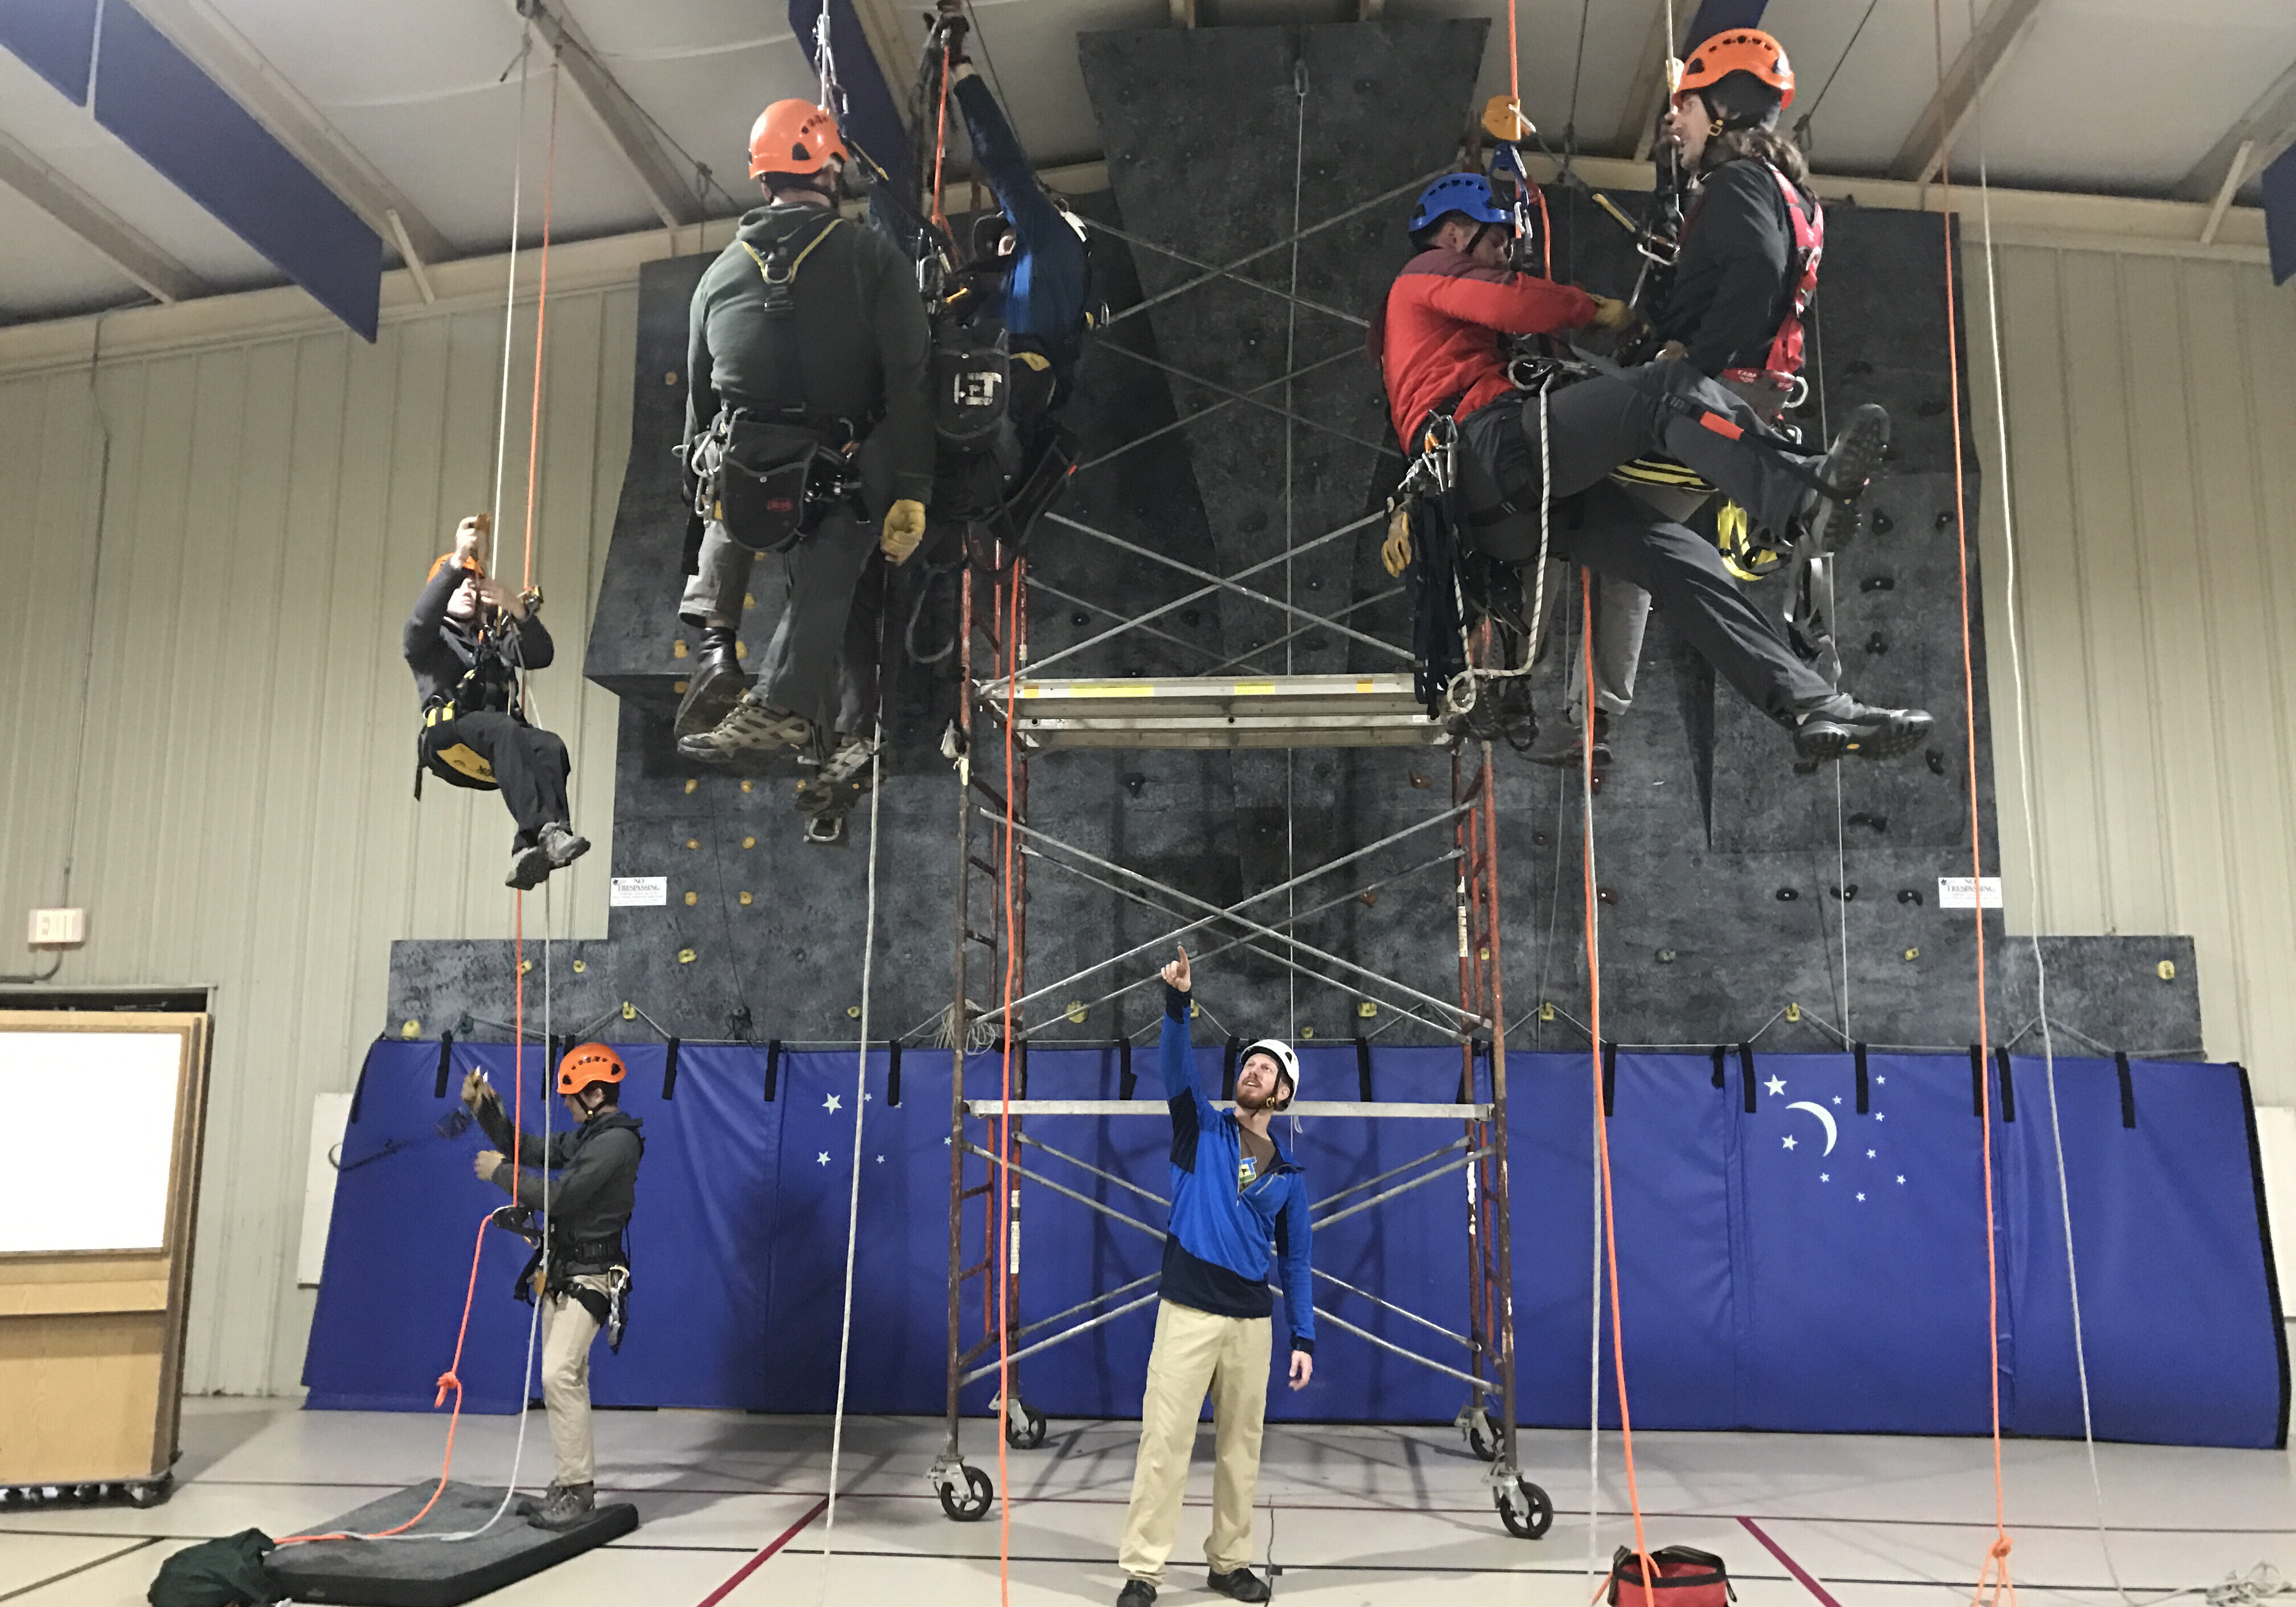 rope-access-training-challenge-towers-zip-line-challenge-course-builder-inspector